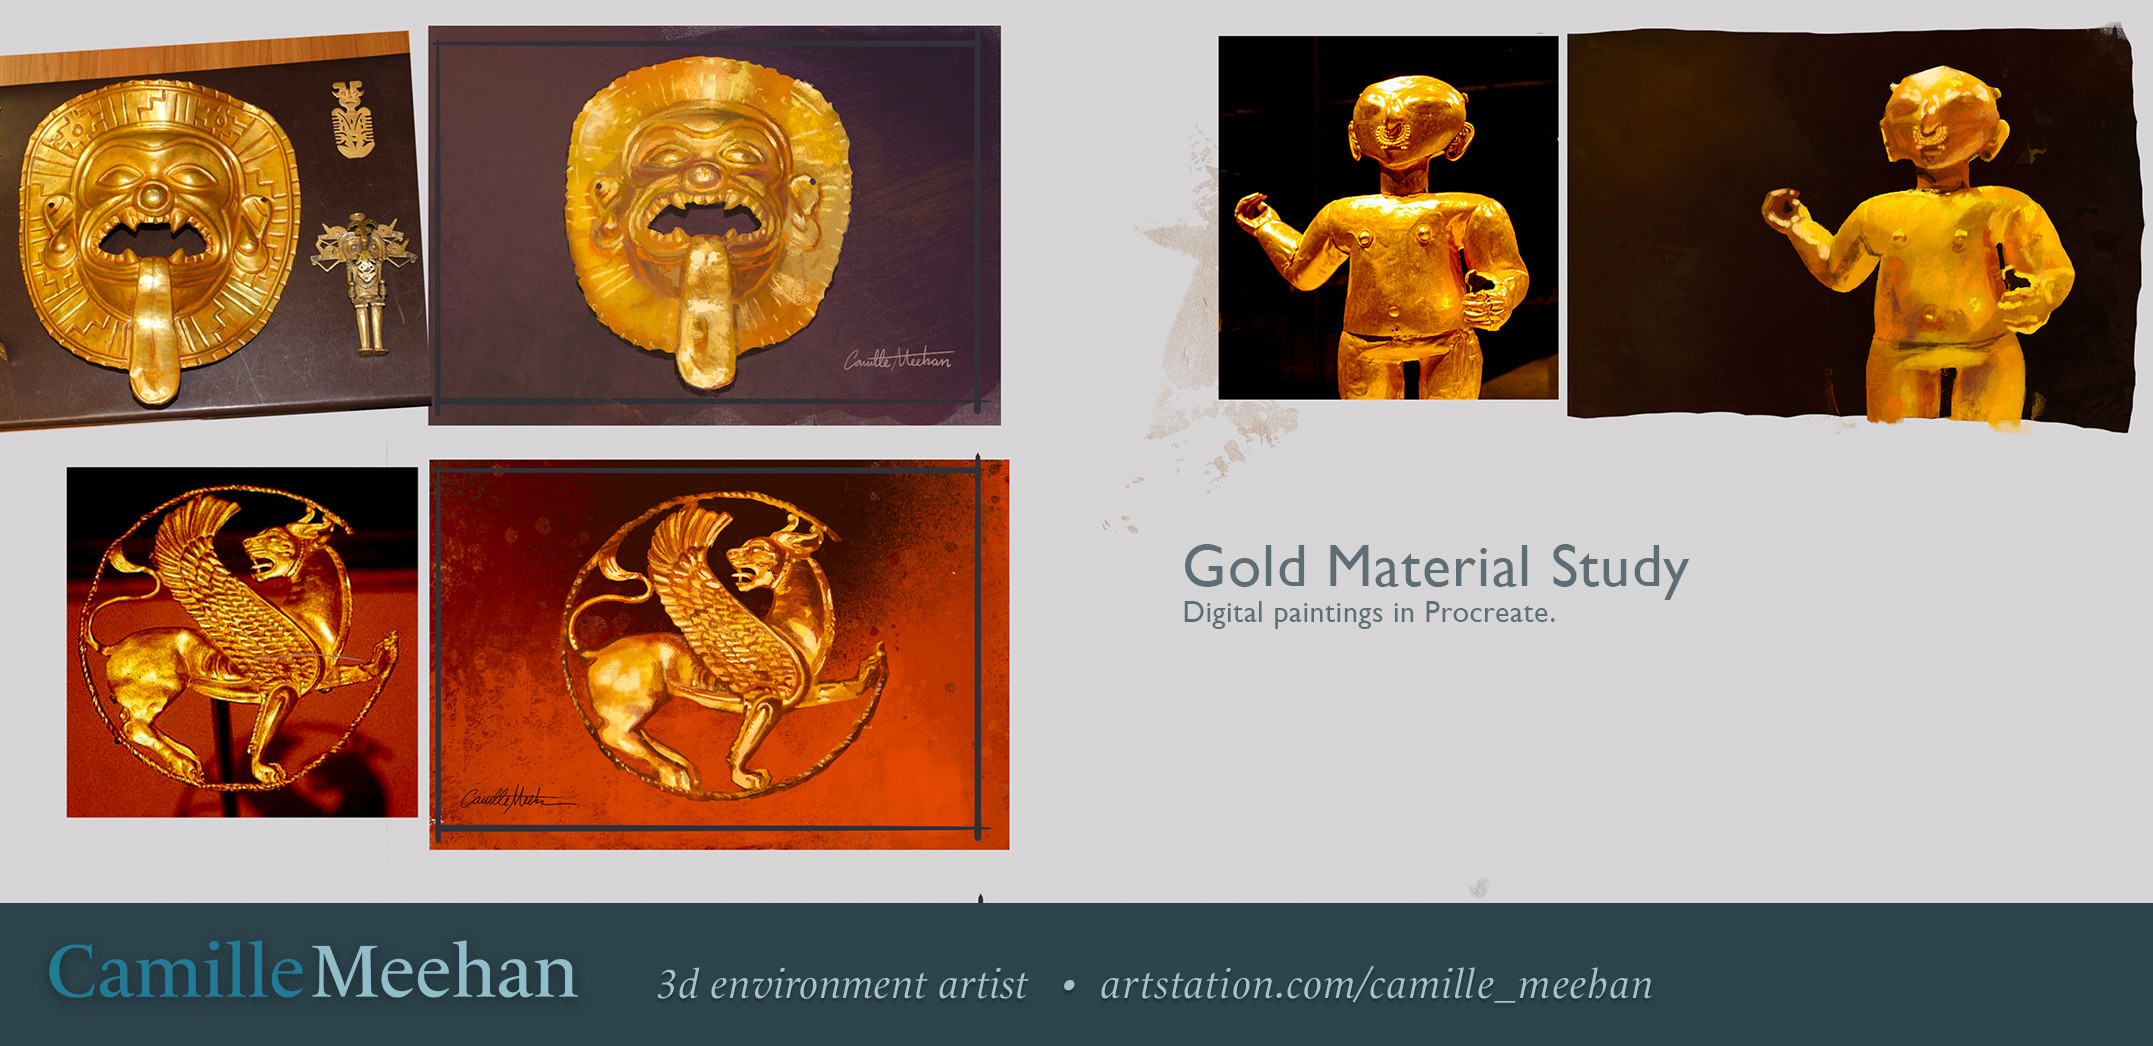 In addition to ancient Persia, I studied the work of goldsmiths from Tumaco, Colombia. The mask is a recovered stolen artifact, https://www.smithsonianmag.com/smart-news/19000-artifacts-recovered-international-antiquities-trafficking-sting-1-180974836/